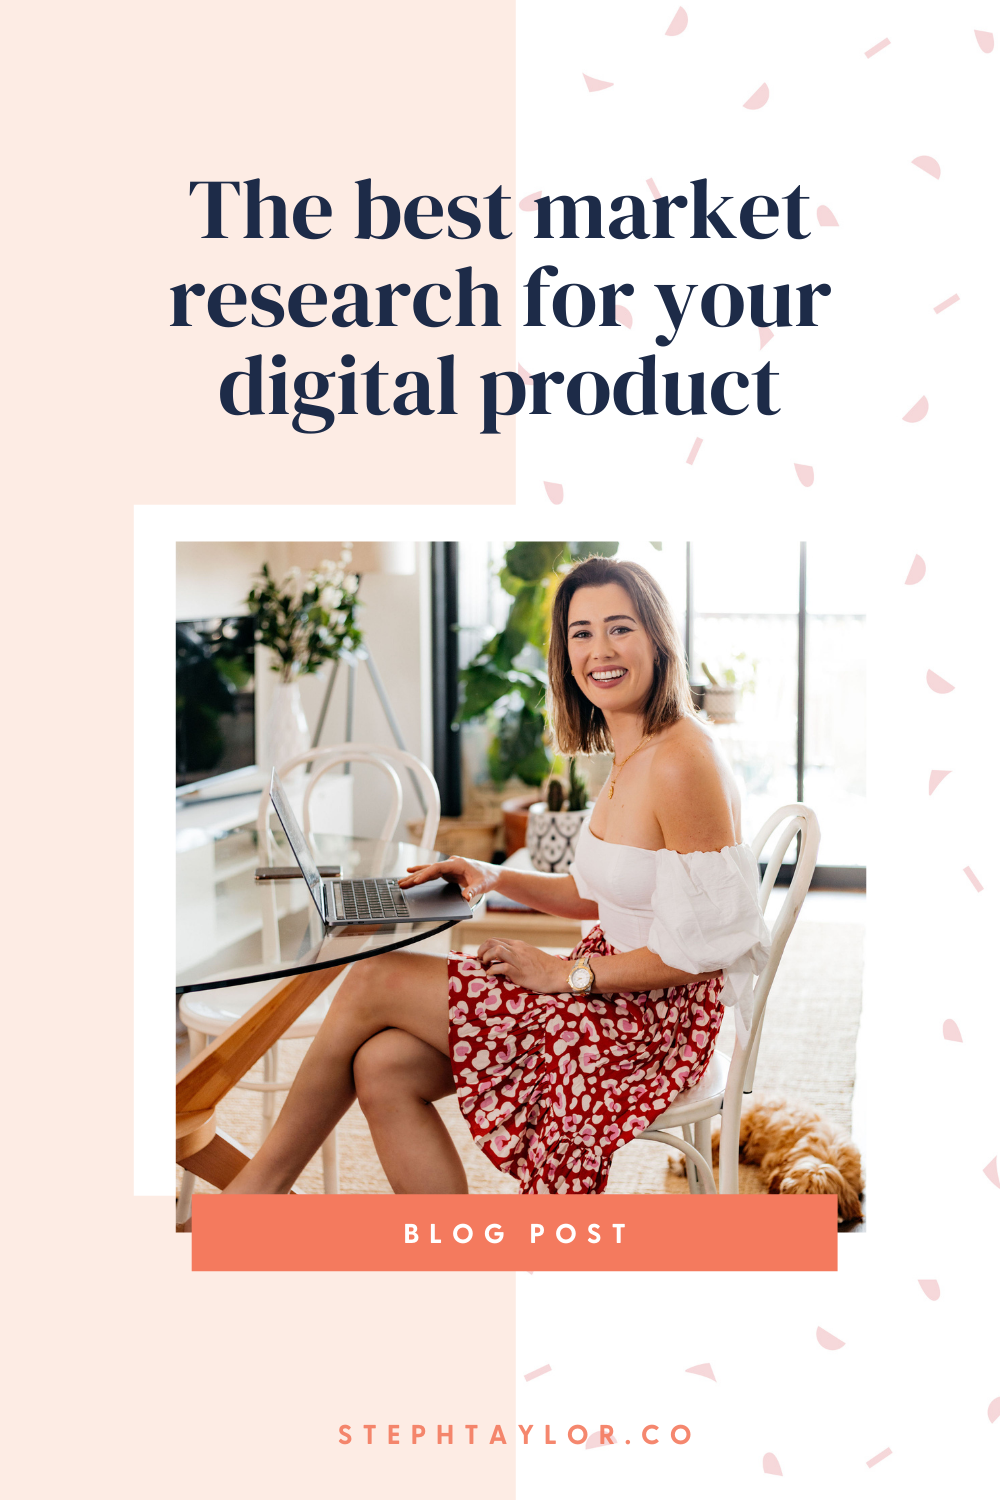 Best market research for your digital product